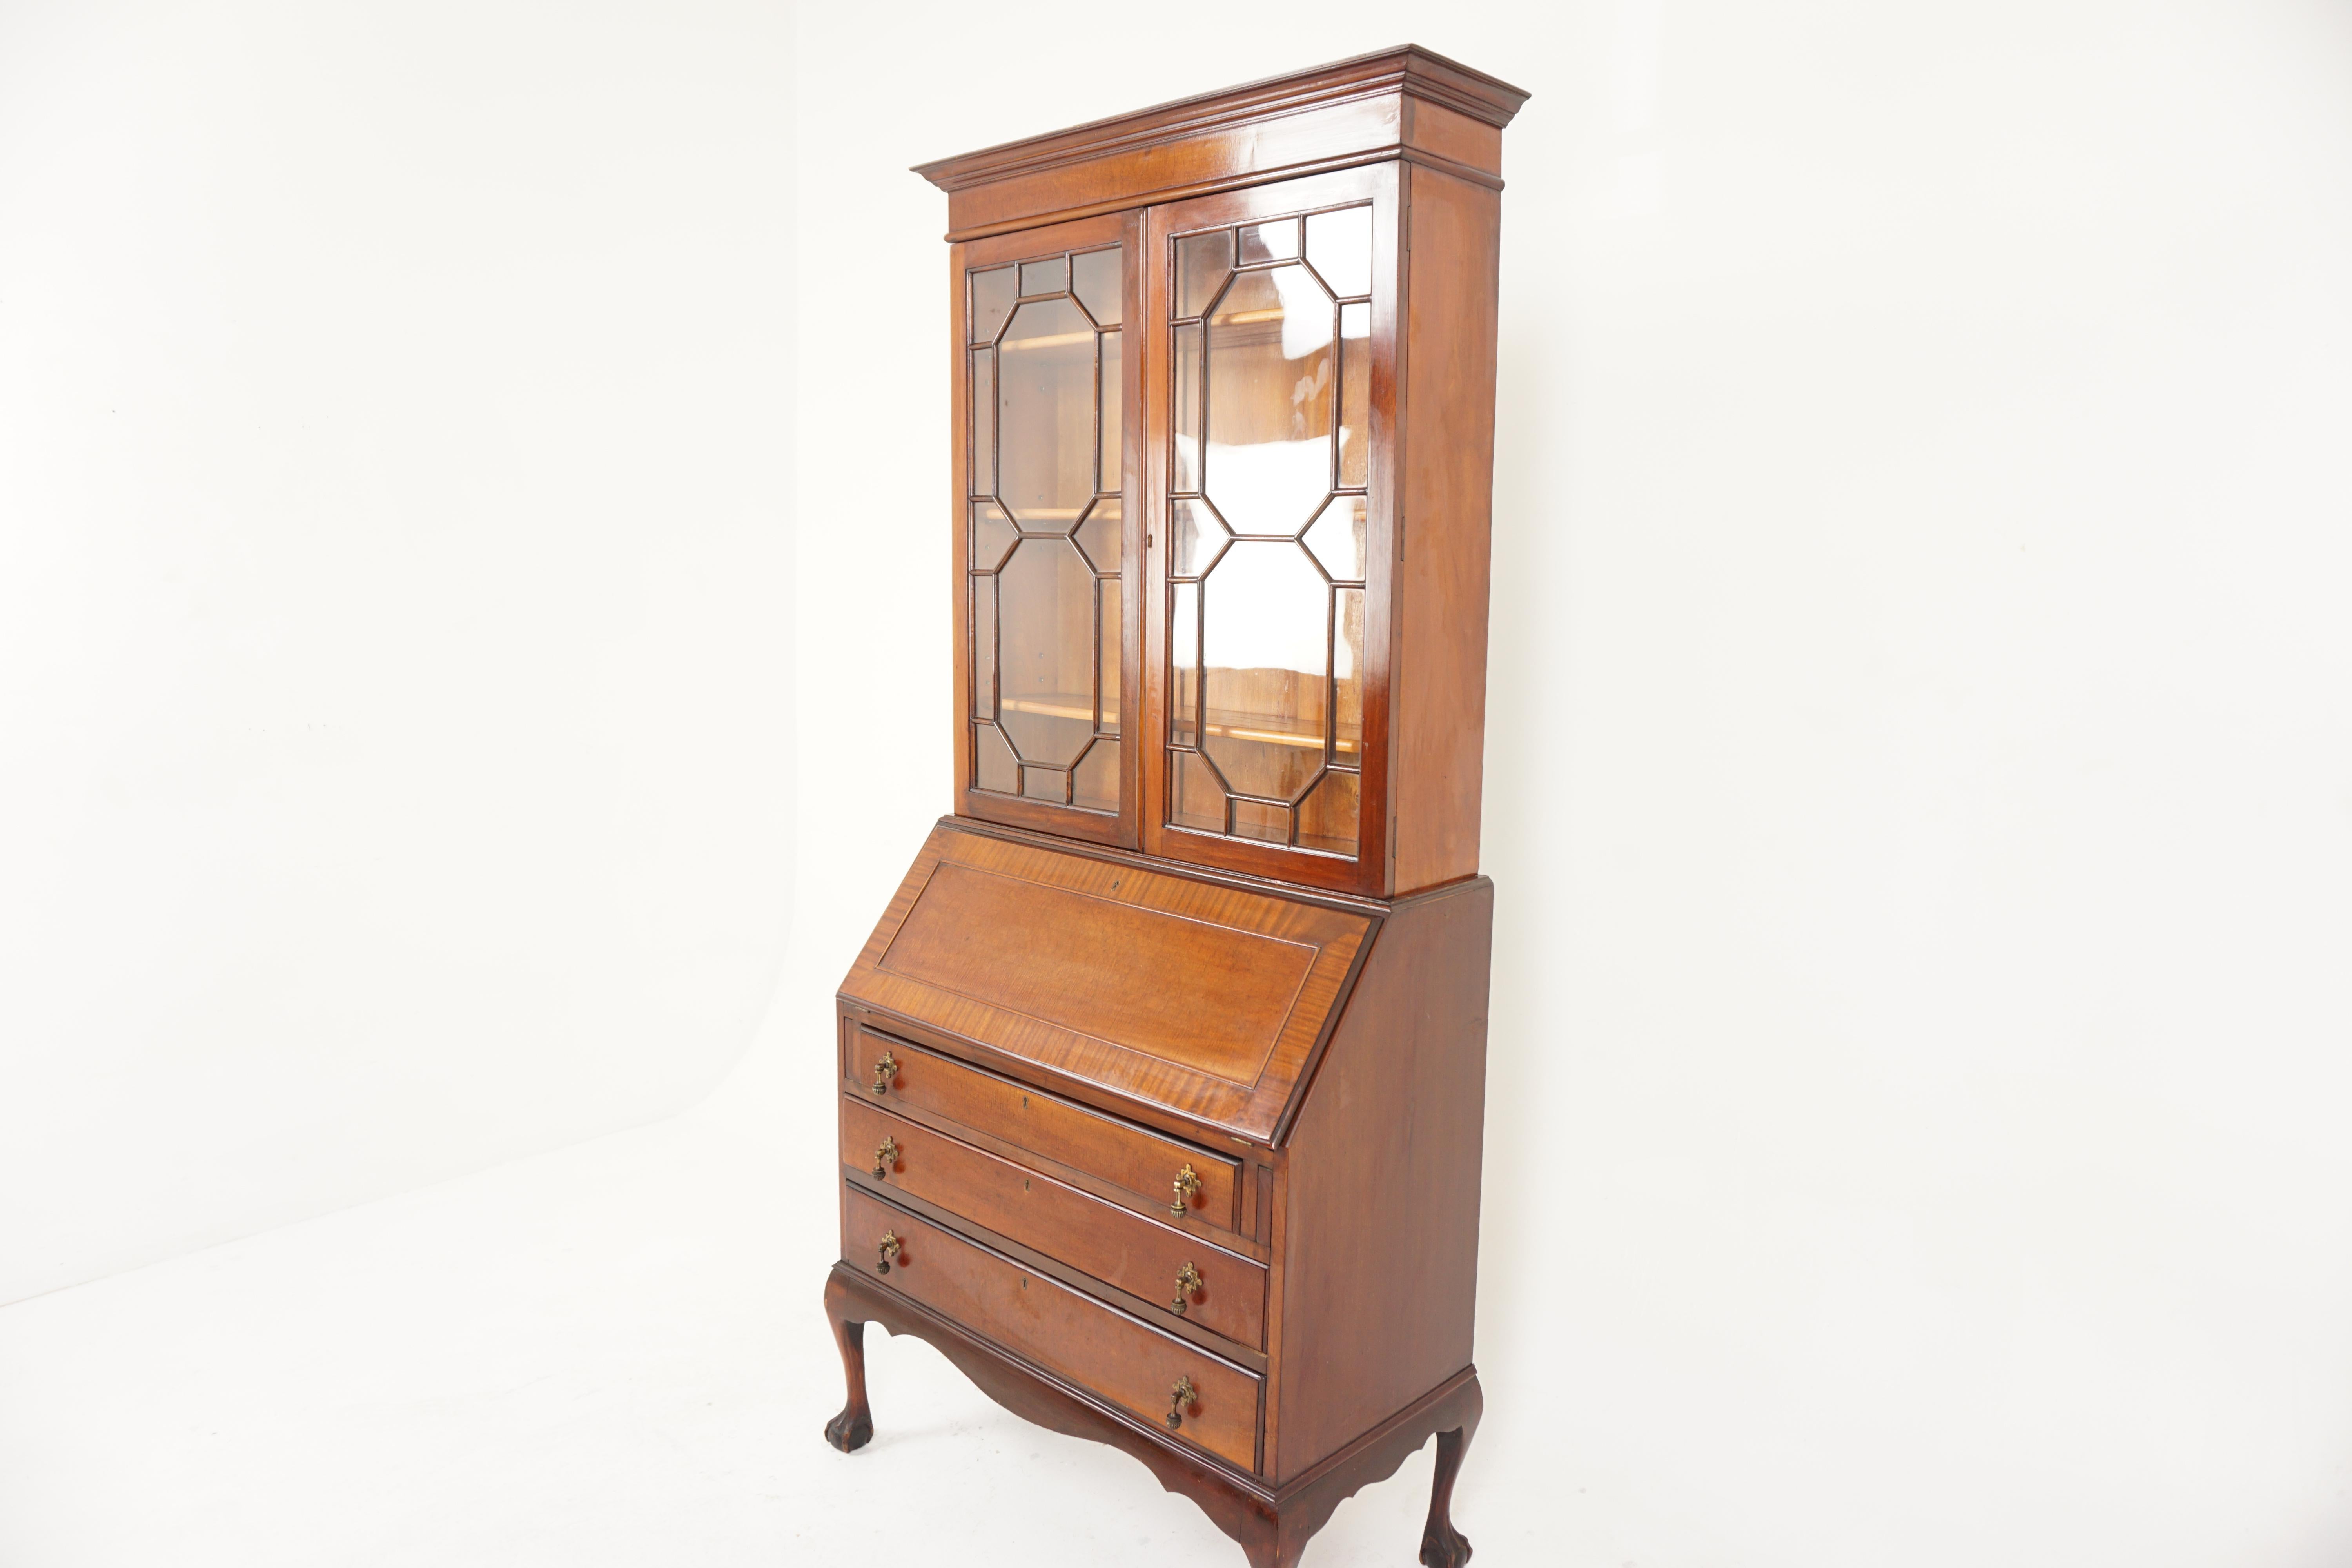 Ant. walnut Bureau bookcase, drop front desk with bookcase top, Scotland 1920, H747

Scotland 1920
Solid walnut
Original finish
Flared cornice on top
Above a pair of moulded glass doors
Opening to reveal three adjusted shelves
Above a desk